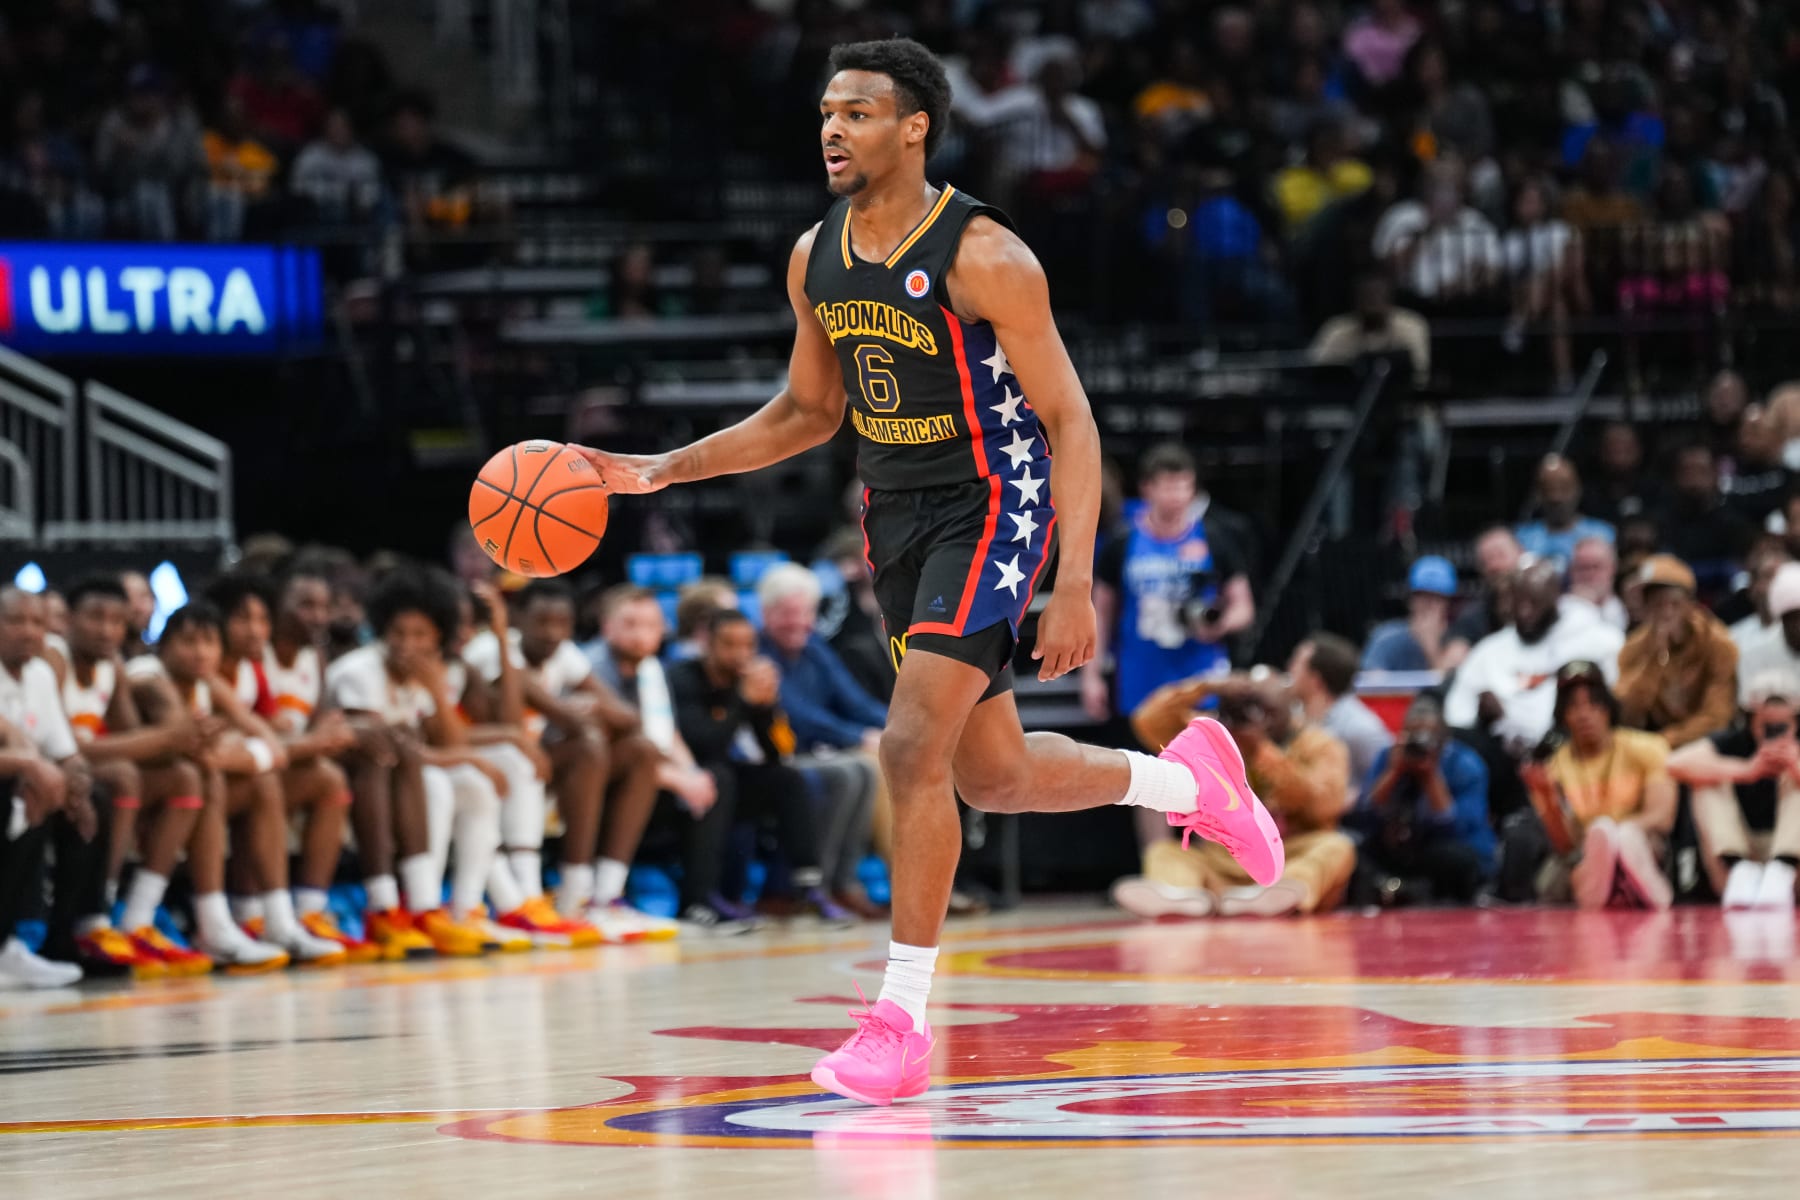 McDonald's All-American Game 2023 highlights, results: D.J. Wagner